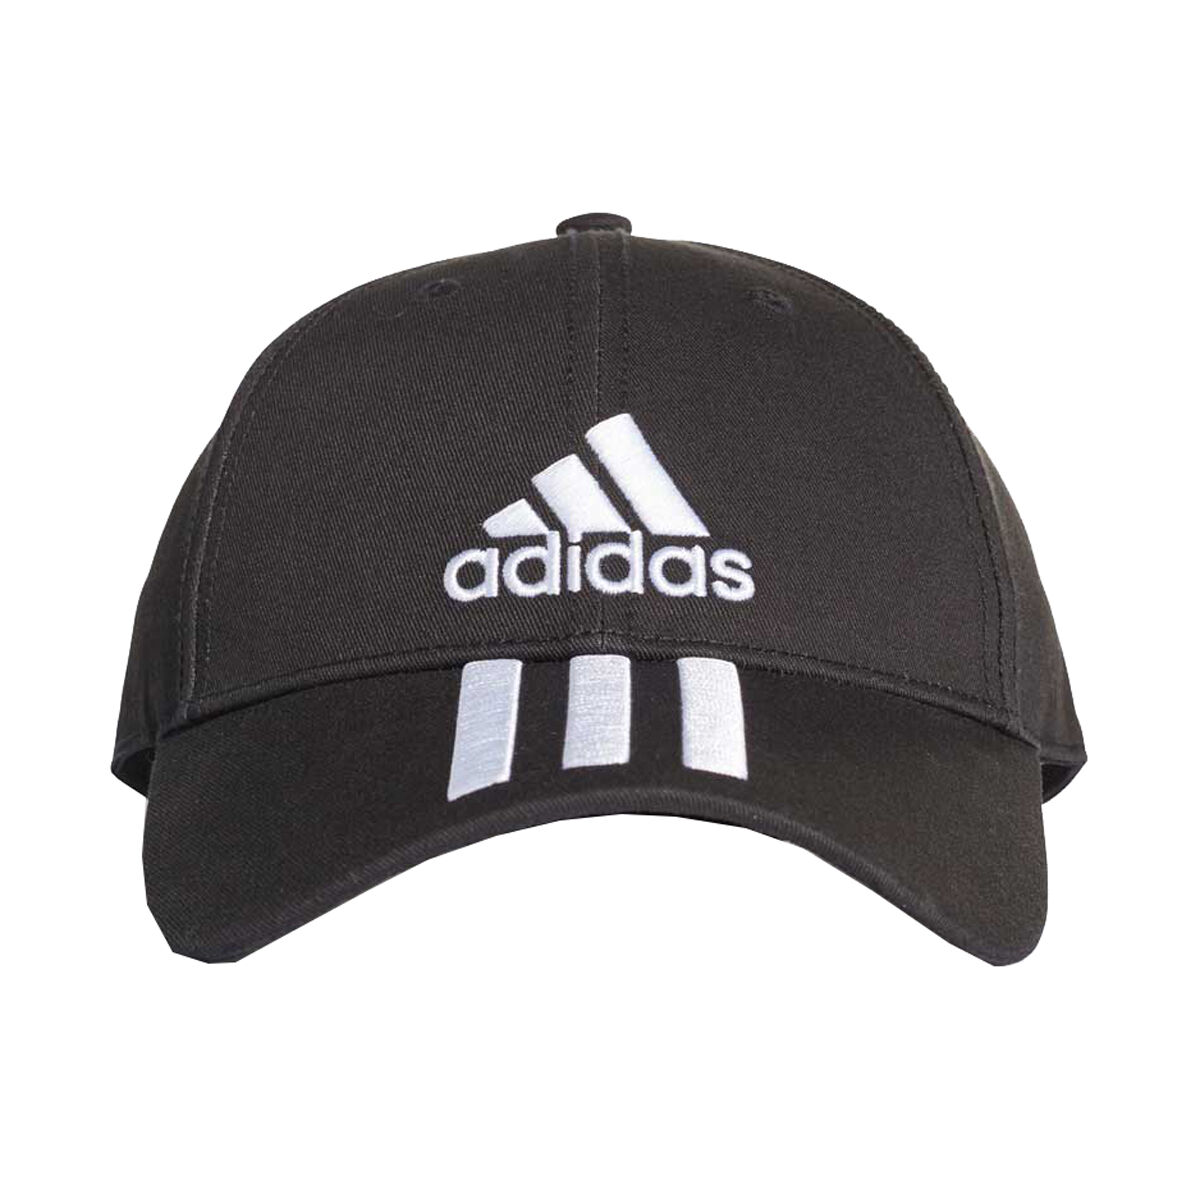 black and white adidas hat